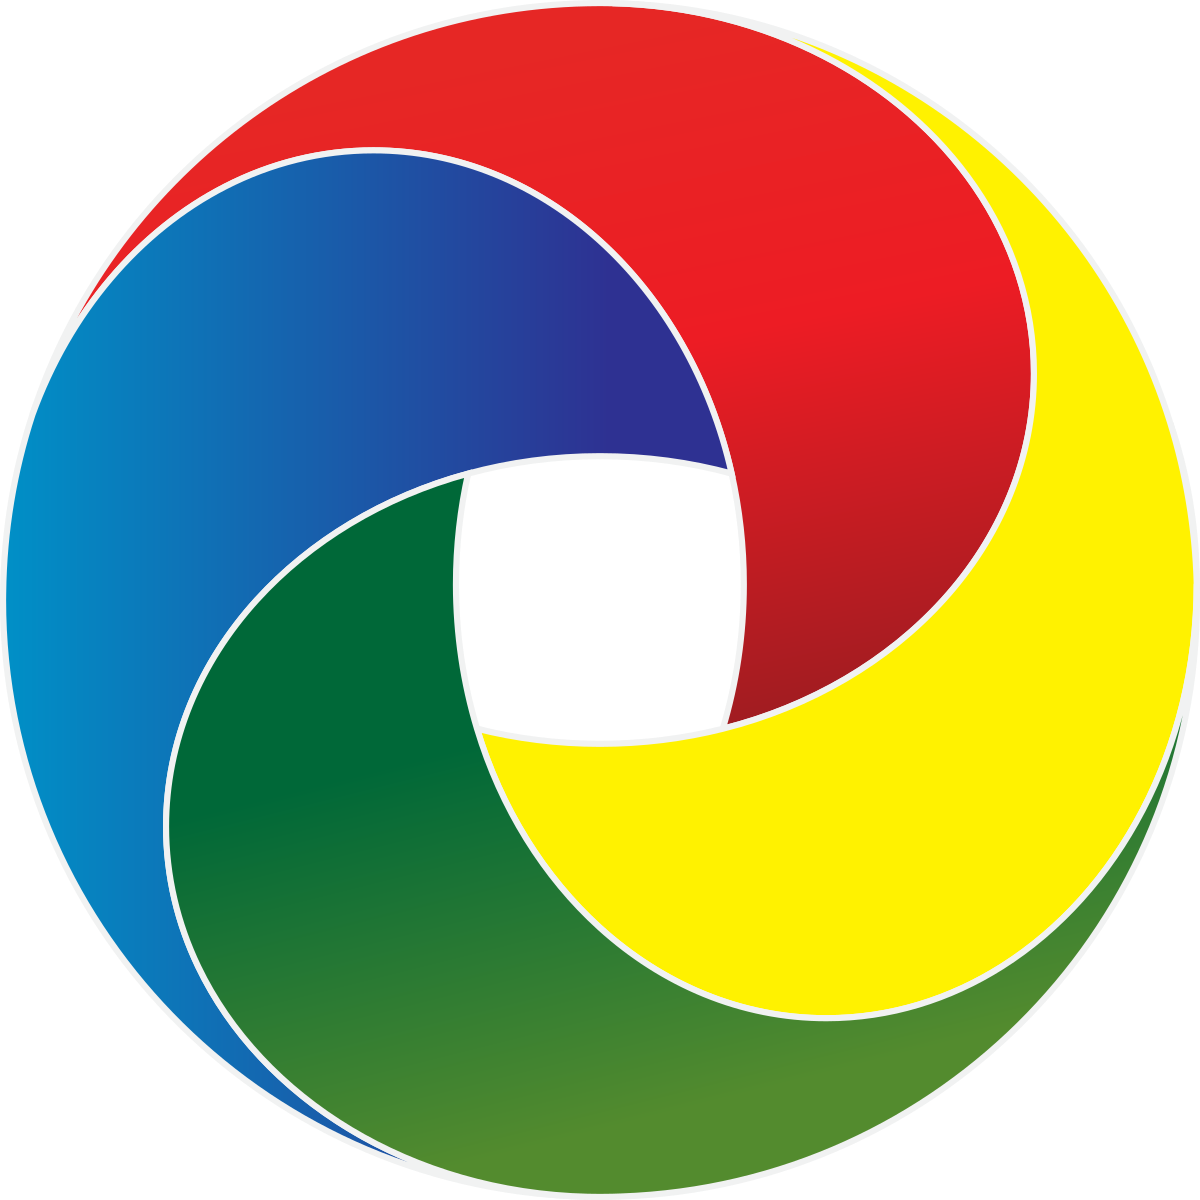 File:Vector-based example.svg - Wikimedia Commons - Google Logos Sample Images